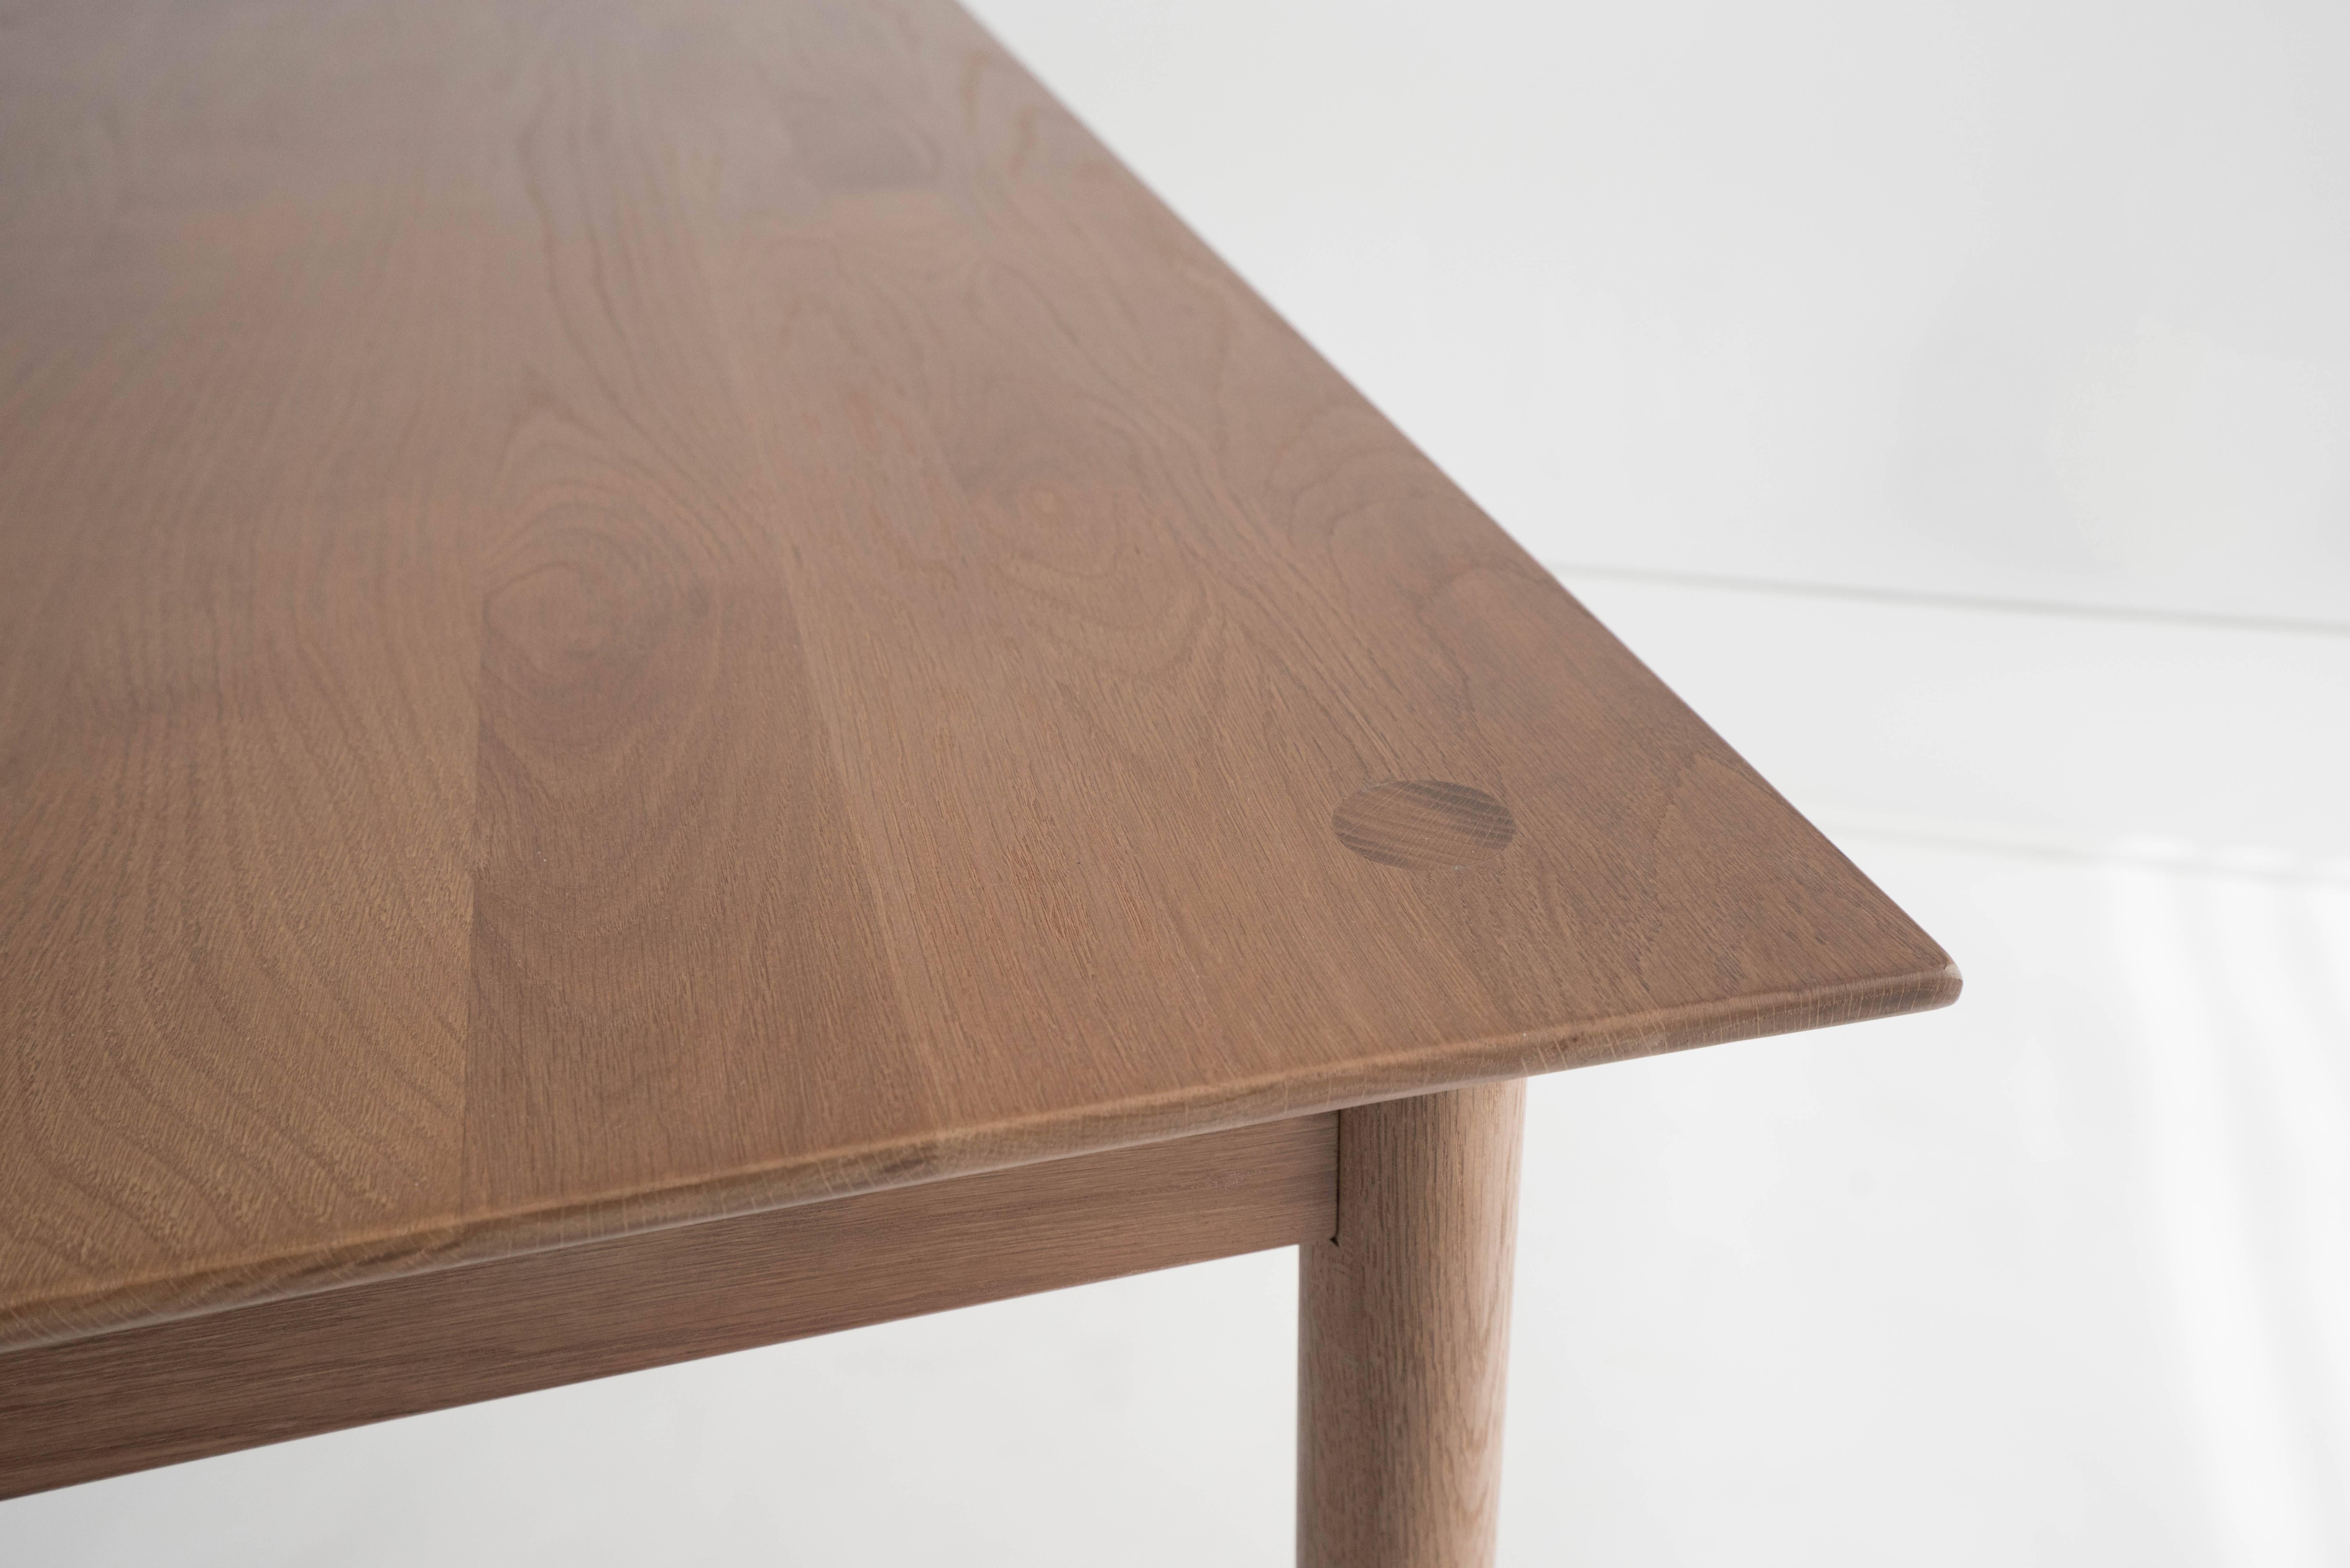 Joinery Coast Table by Sun at Six, Sienna, Minimalist Dining Table or Desk in Wood For Sale